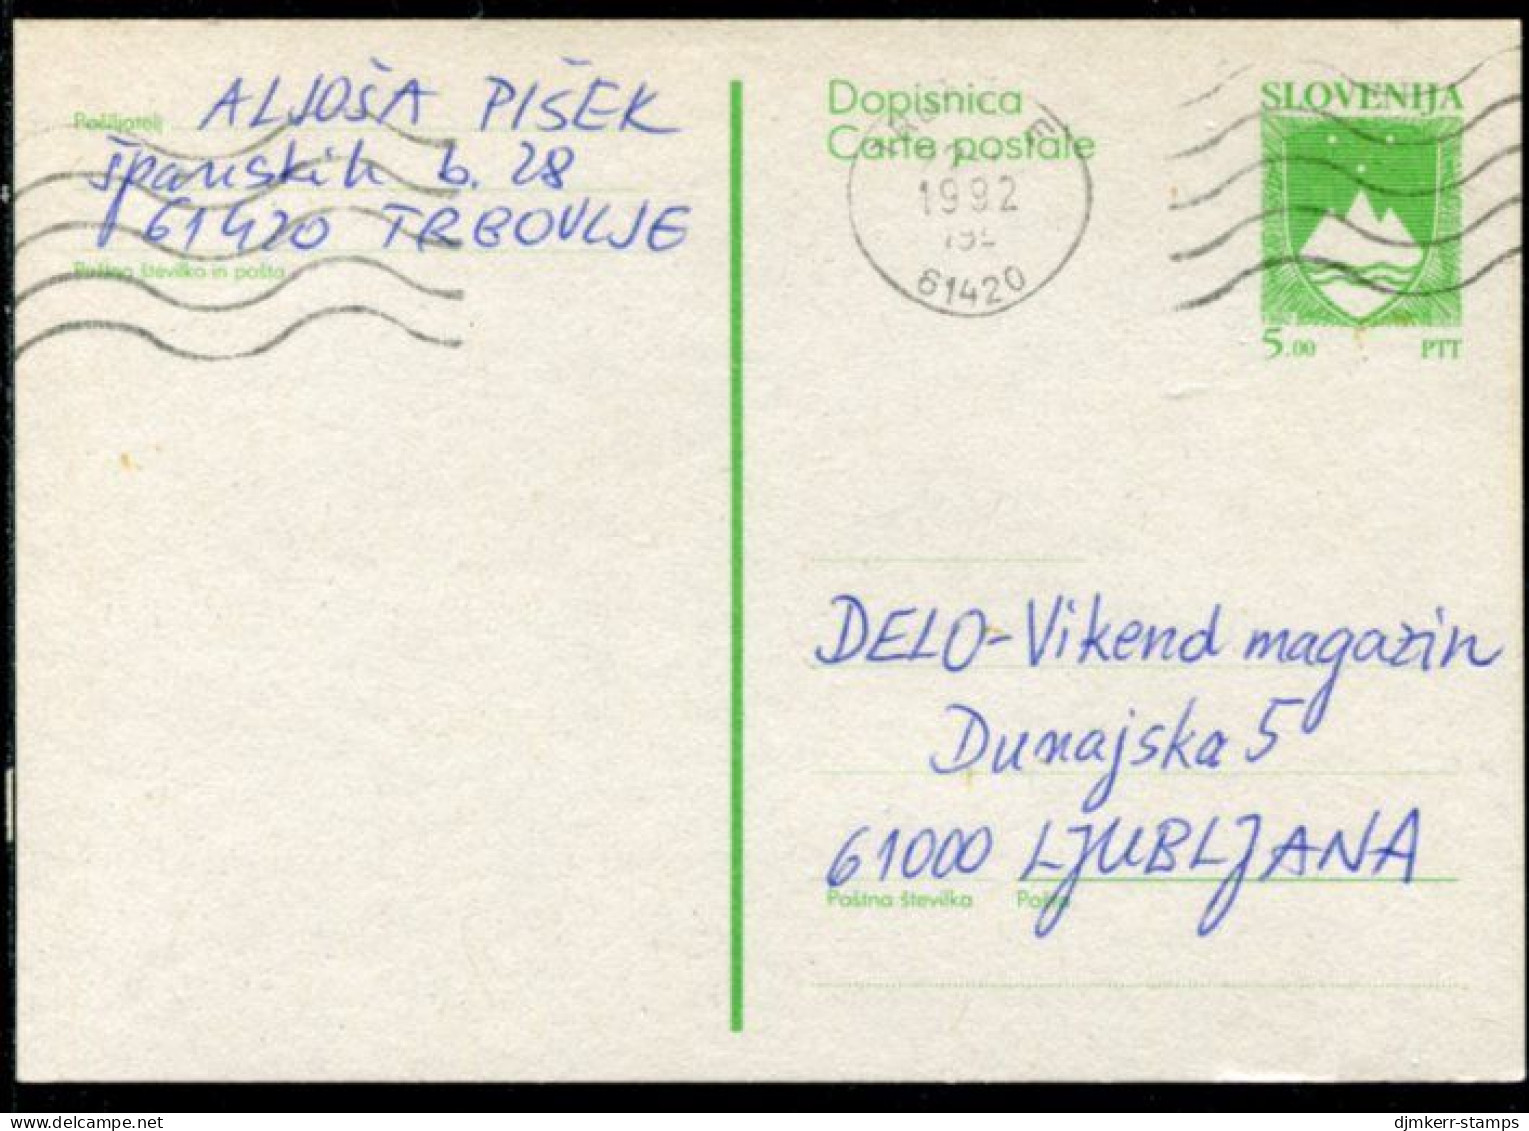 SLOVENIA 1992 5.00 T.  Arms Stationery Card,on Grey Recycled Paper, Used.   Michel P3b - Slovenië